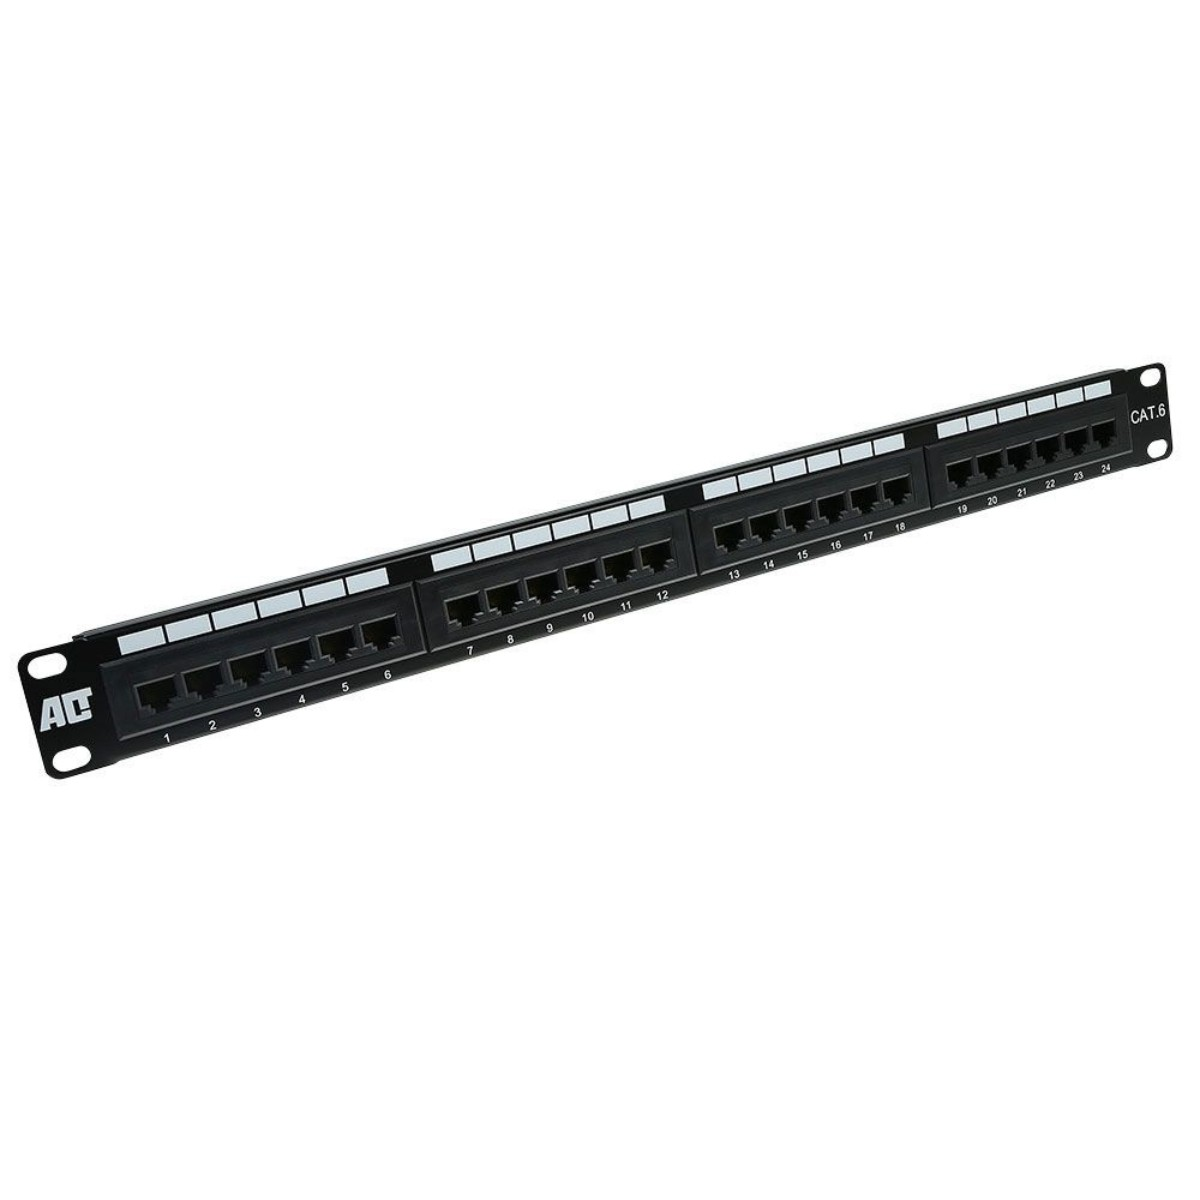 ACT PP1010 24-Ports CAT6 Patchpanel